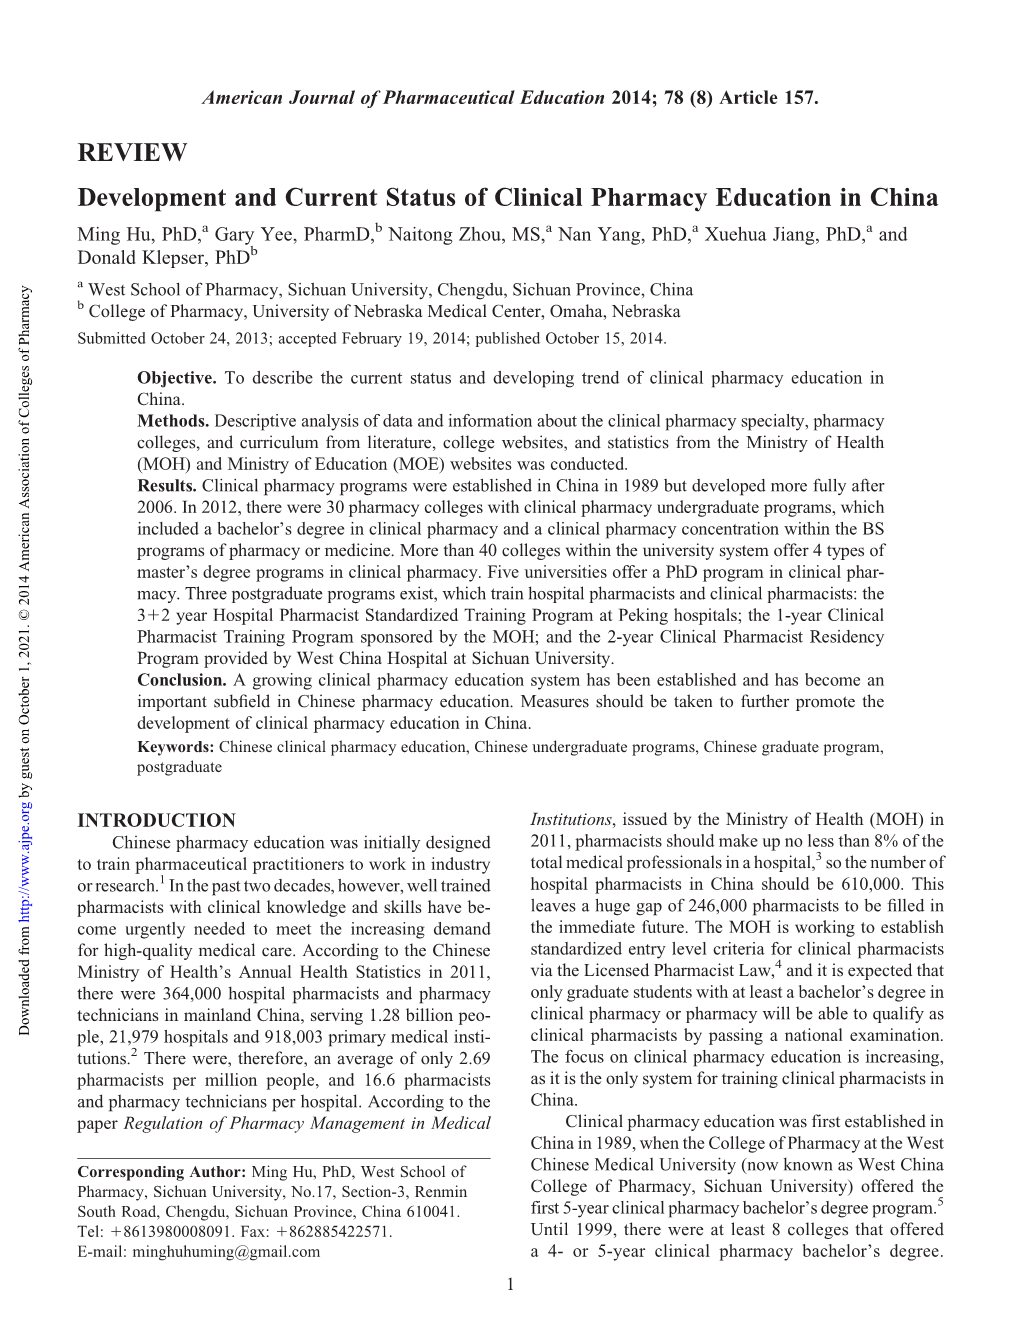 Development and Current Status of Clinical Pharmacy Education in China